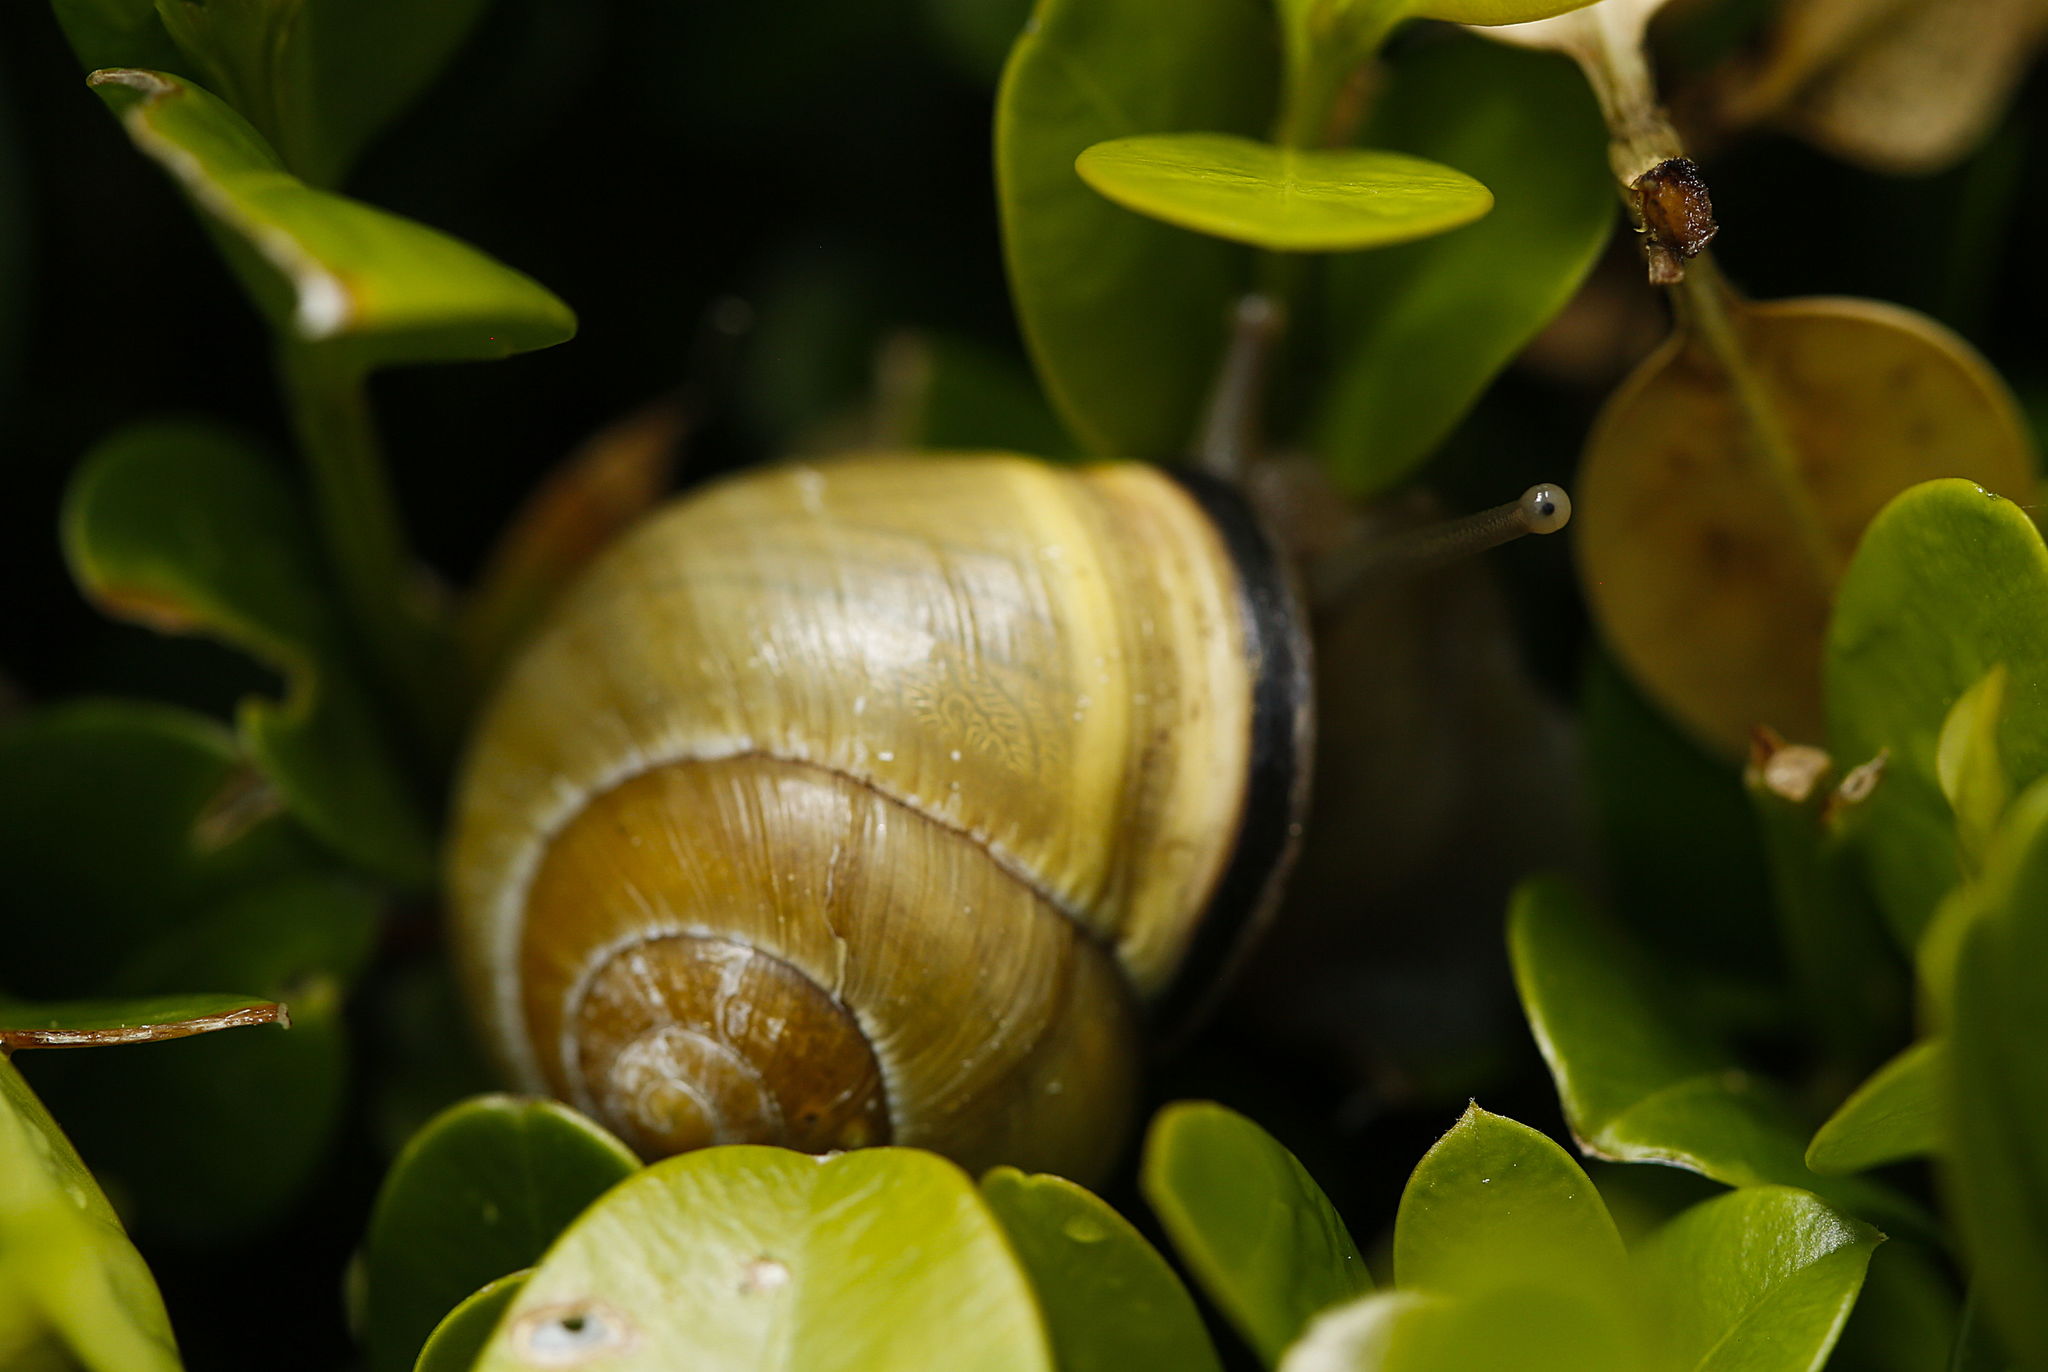 Just when you think nobody is looking: Check out the snail’s eye stalk, peering from the shrub.